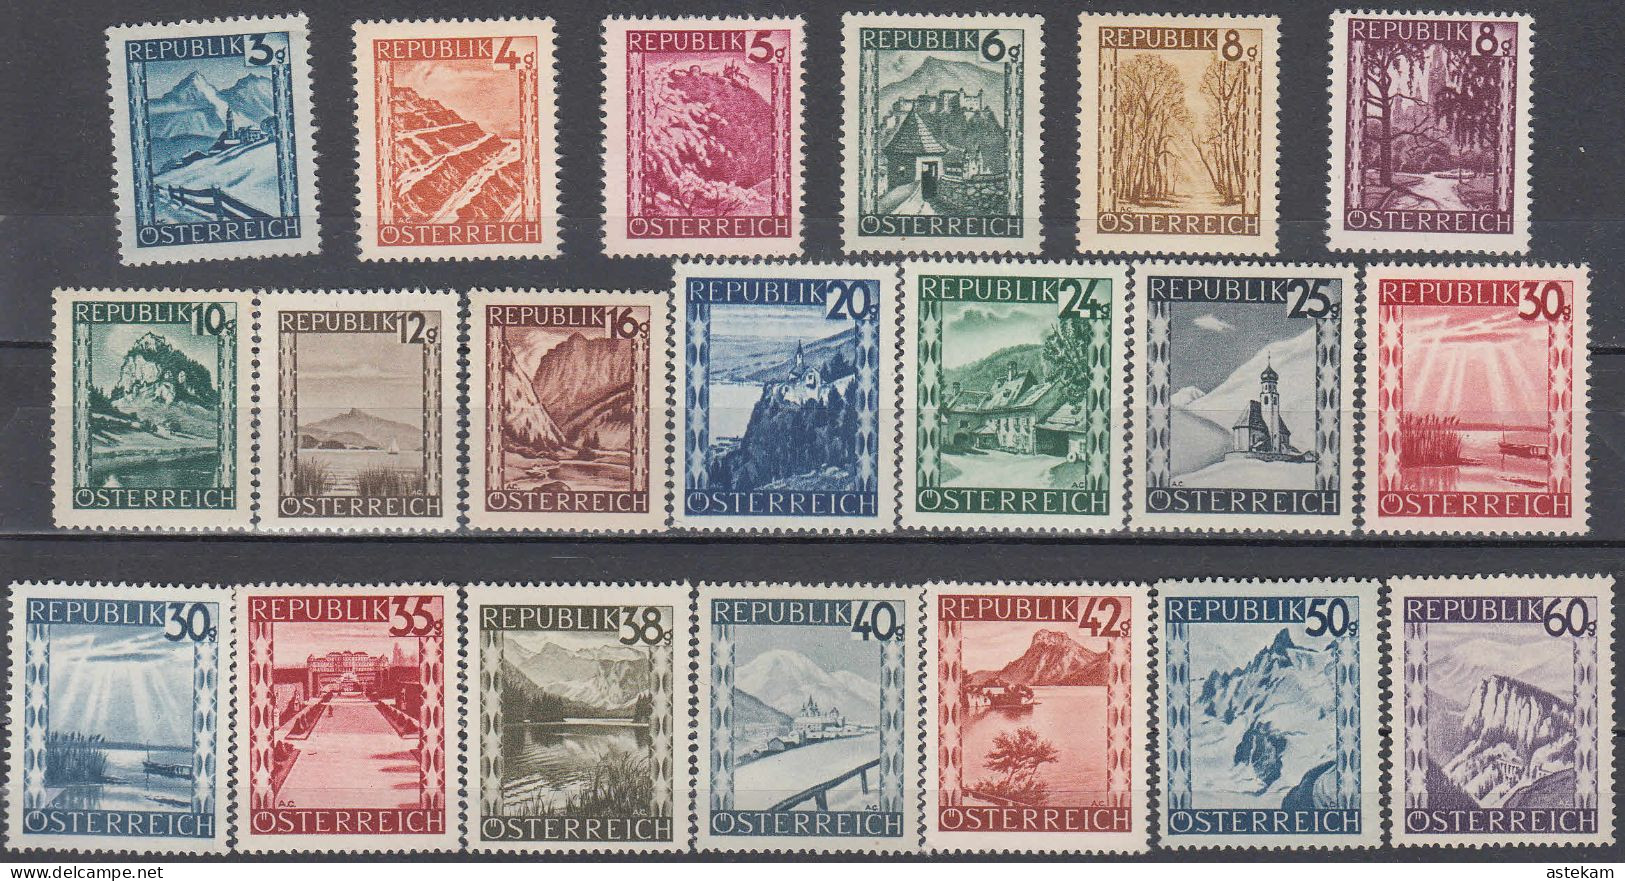 AUSTRIA 1945, VIEWS From AUSTRIA, 20 SEPARATE MNH STAMPS Of SERIES Withn GOOD QUALITY, *** - Oblitérés